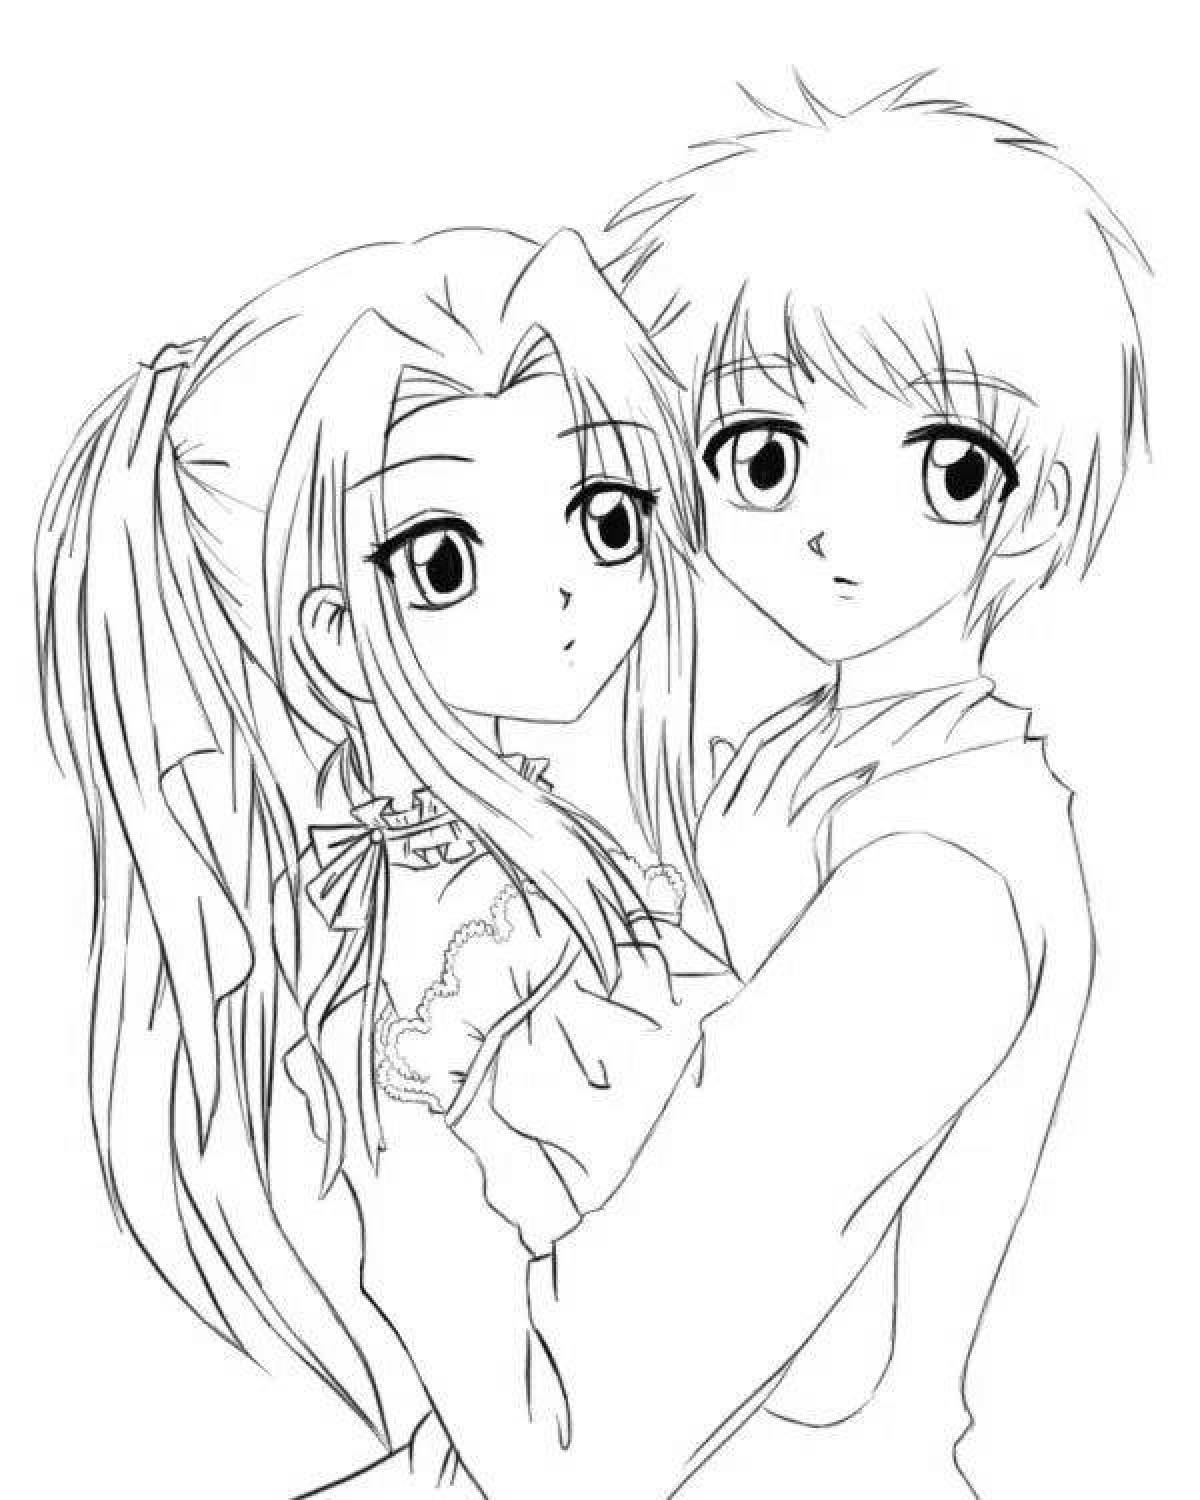 Gorgeous 18 years old anime coloring pages